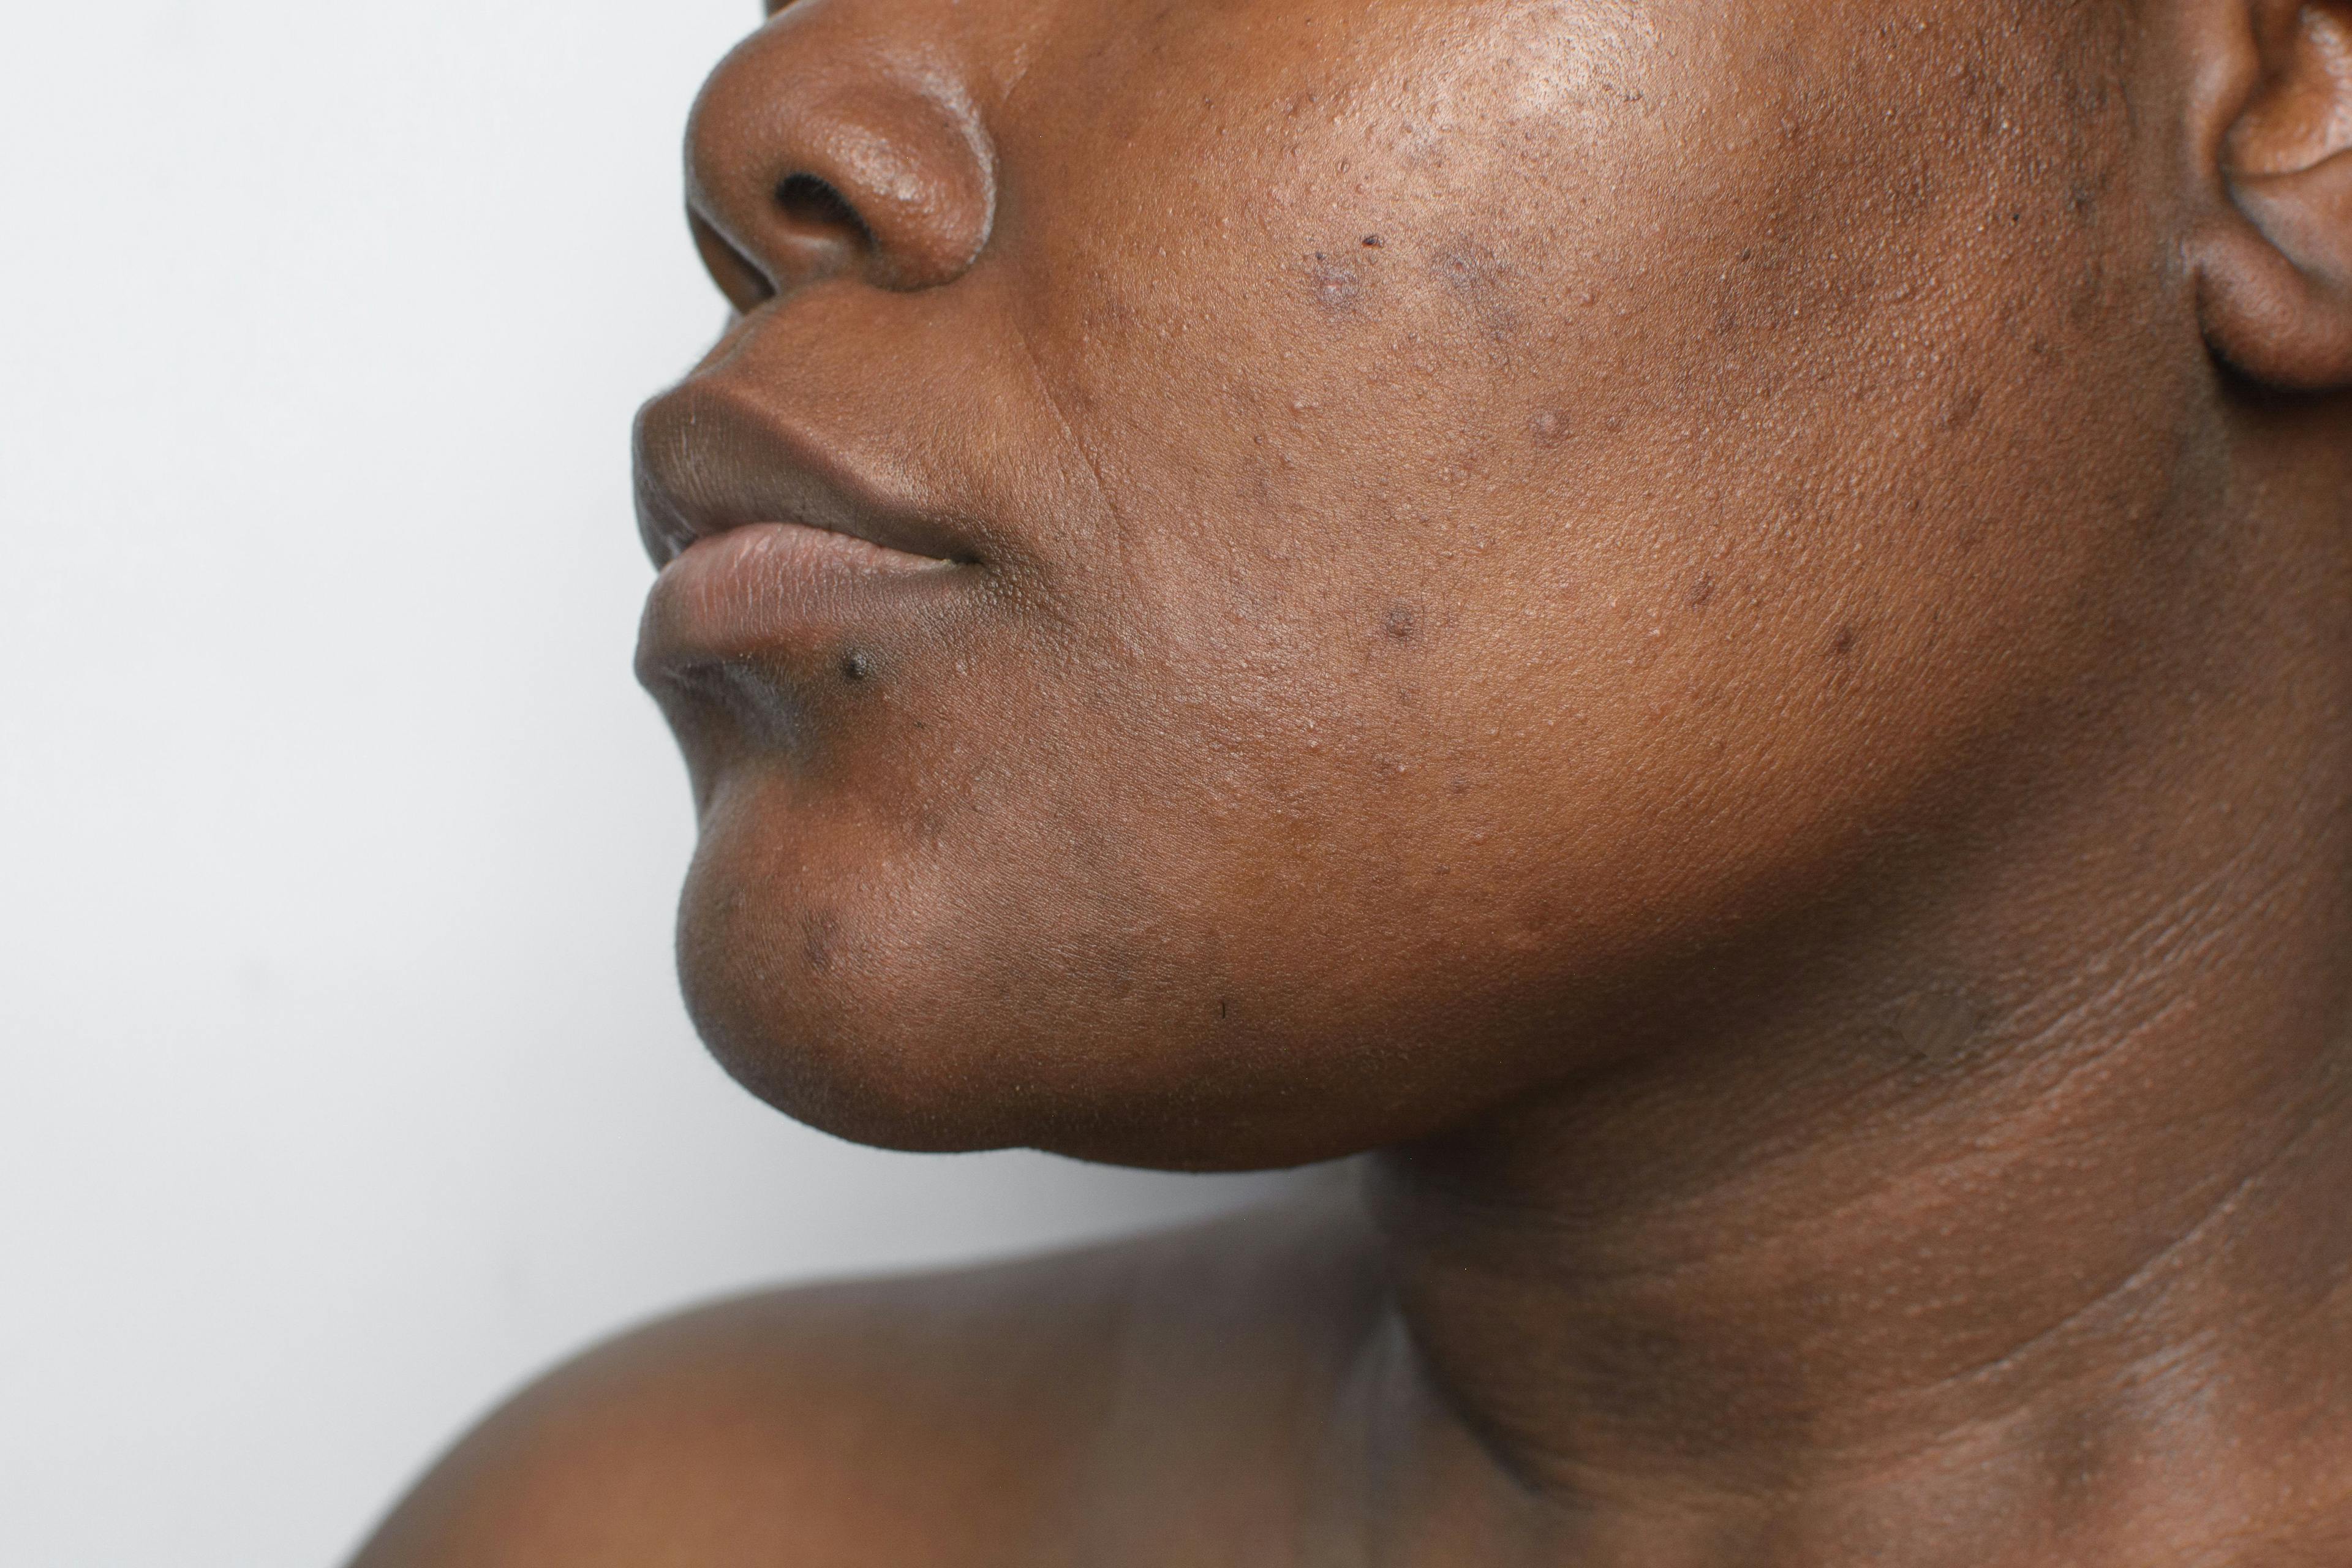 Treating and Preventing Postinflammatory Hypo- and Hyperpigmentation